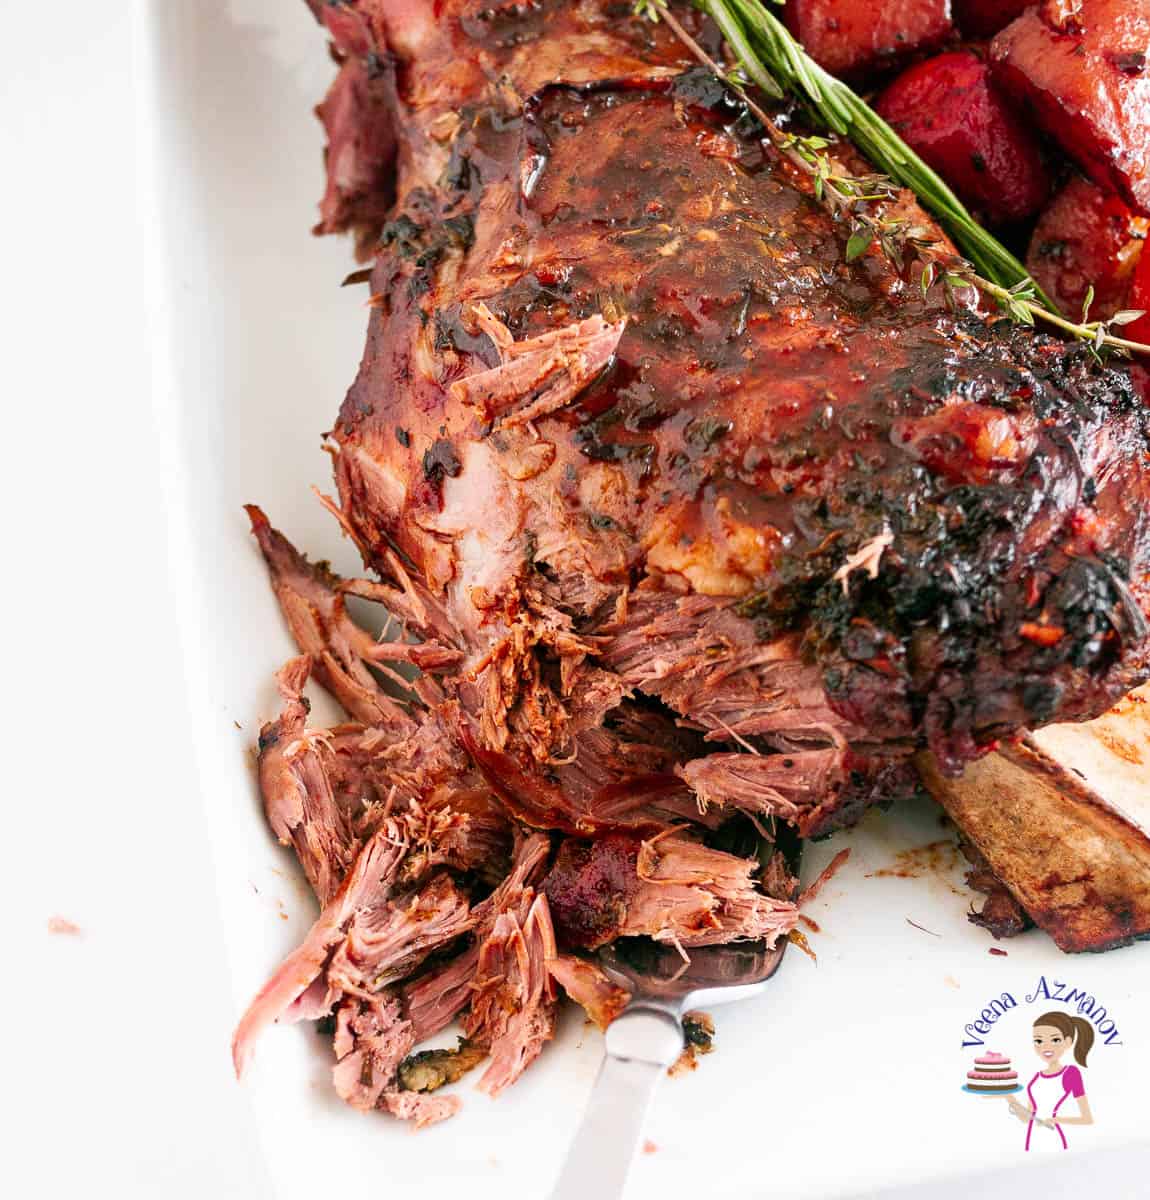 Roasted lamb shoulder on a tray.